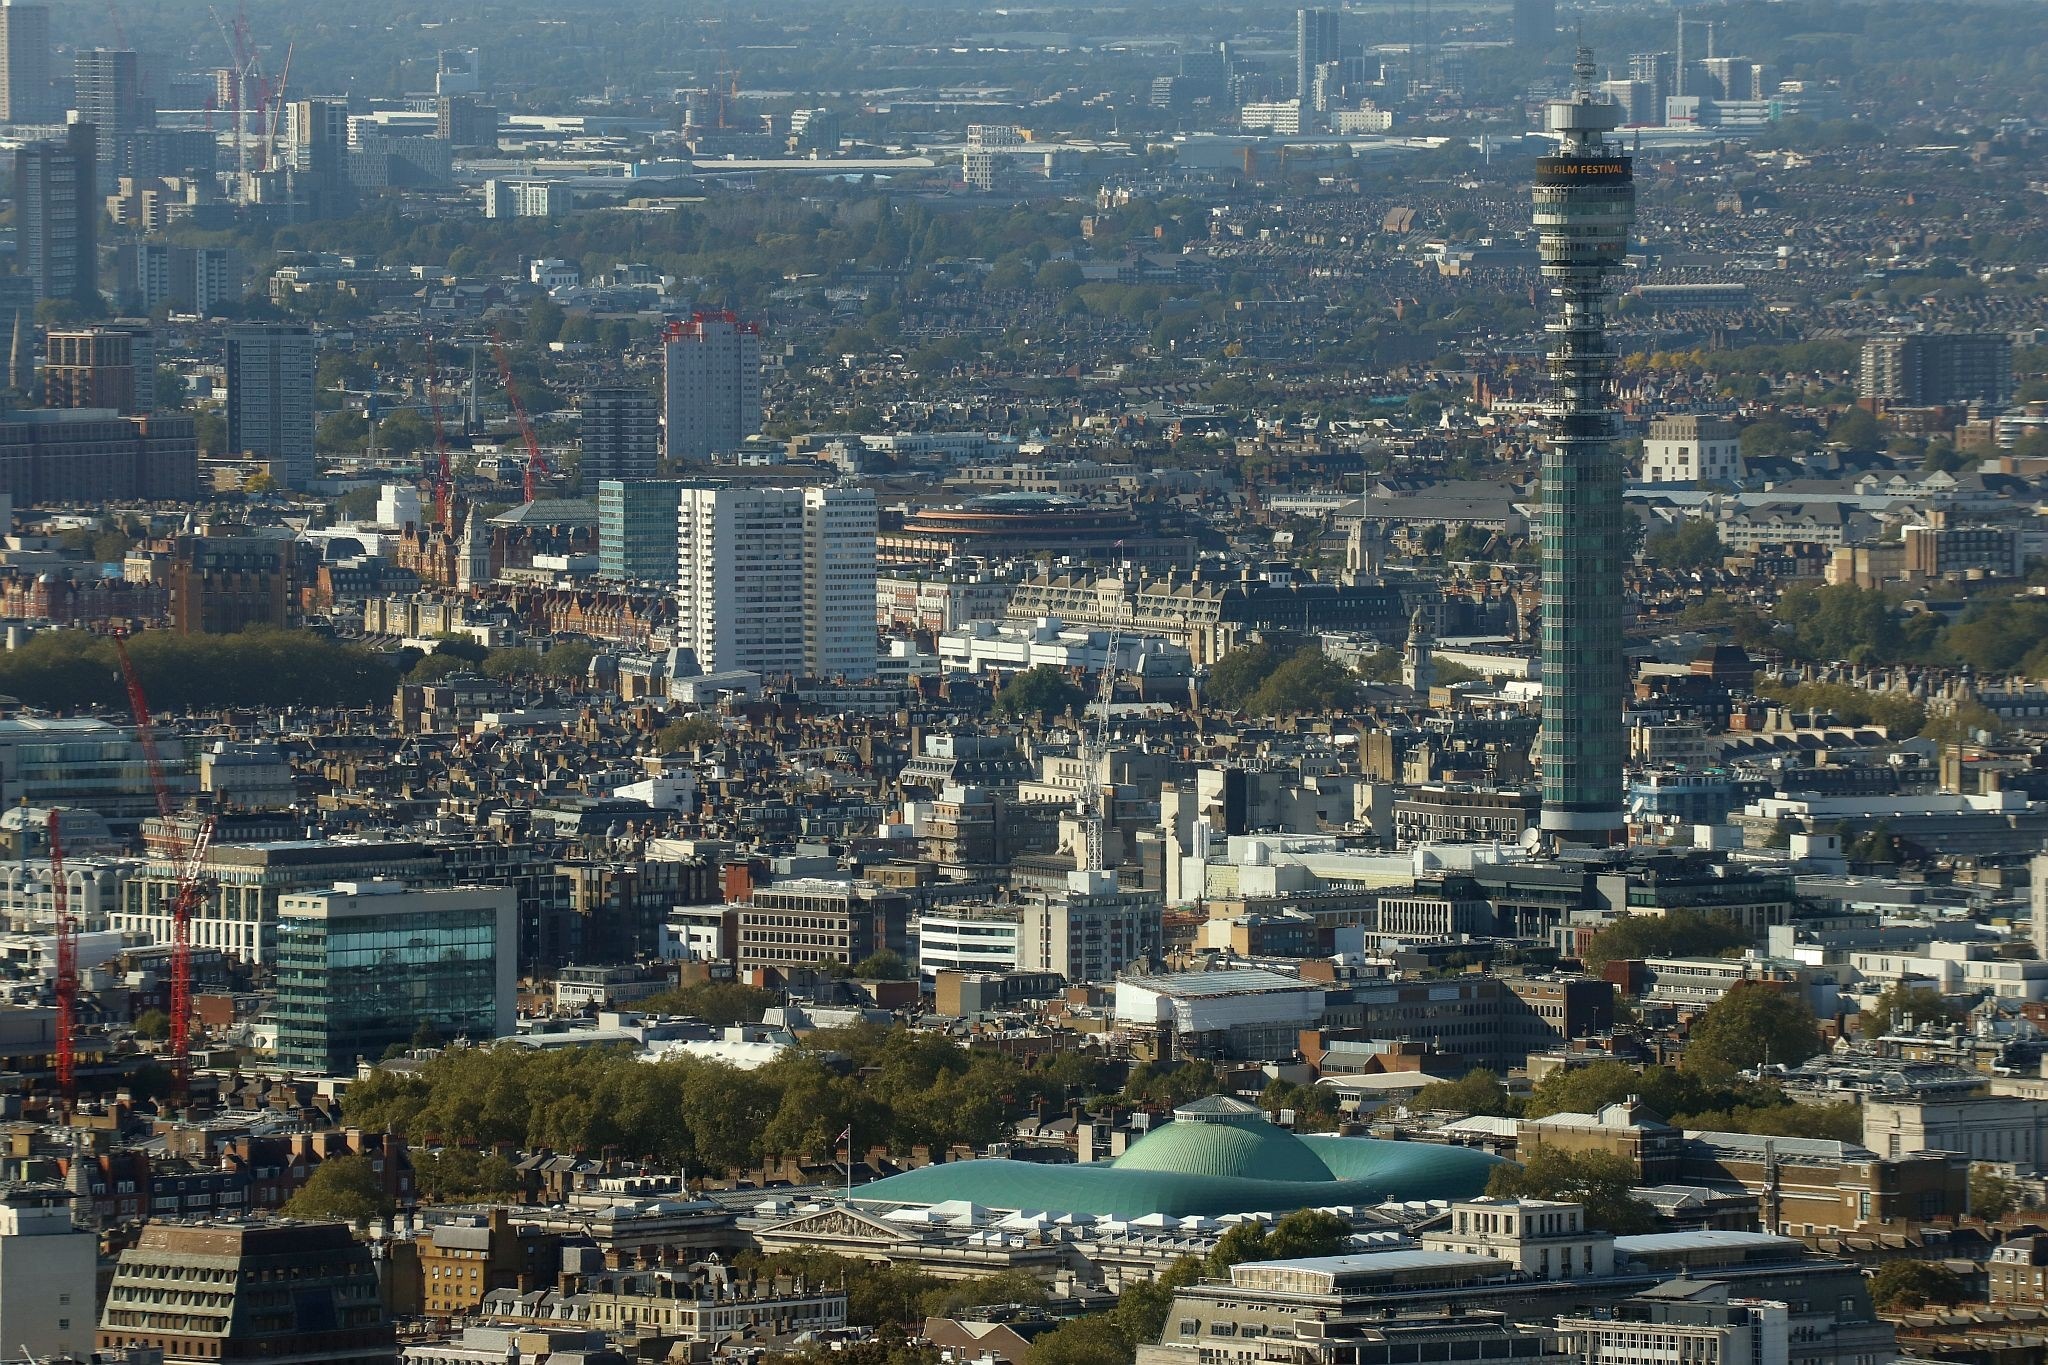 The British Telecom Tower (Post Office Tower, GPO Tower) and British Museum. View from the Horizon observation platform on the 58th floor of 22 Bishopsgate in the City of London. Photo taken on 15-Oct-2023.